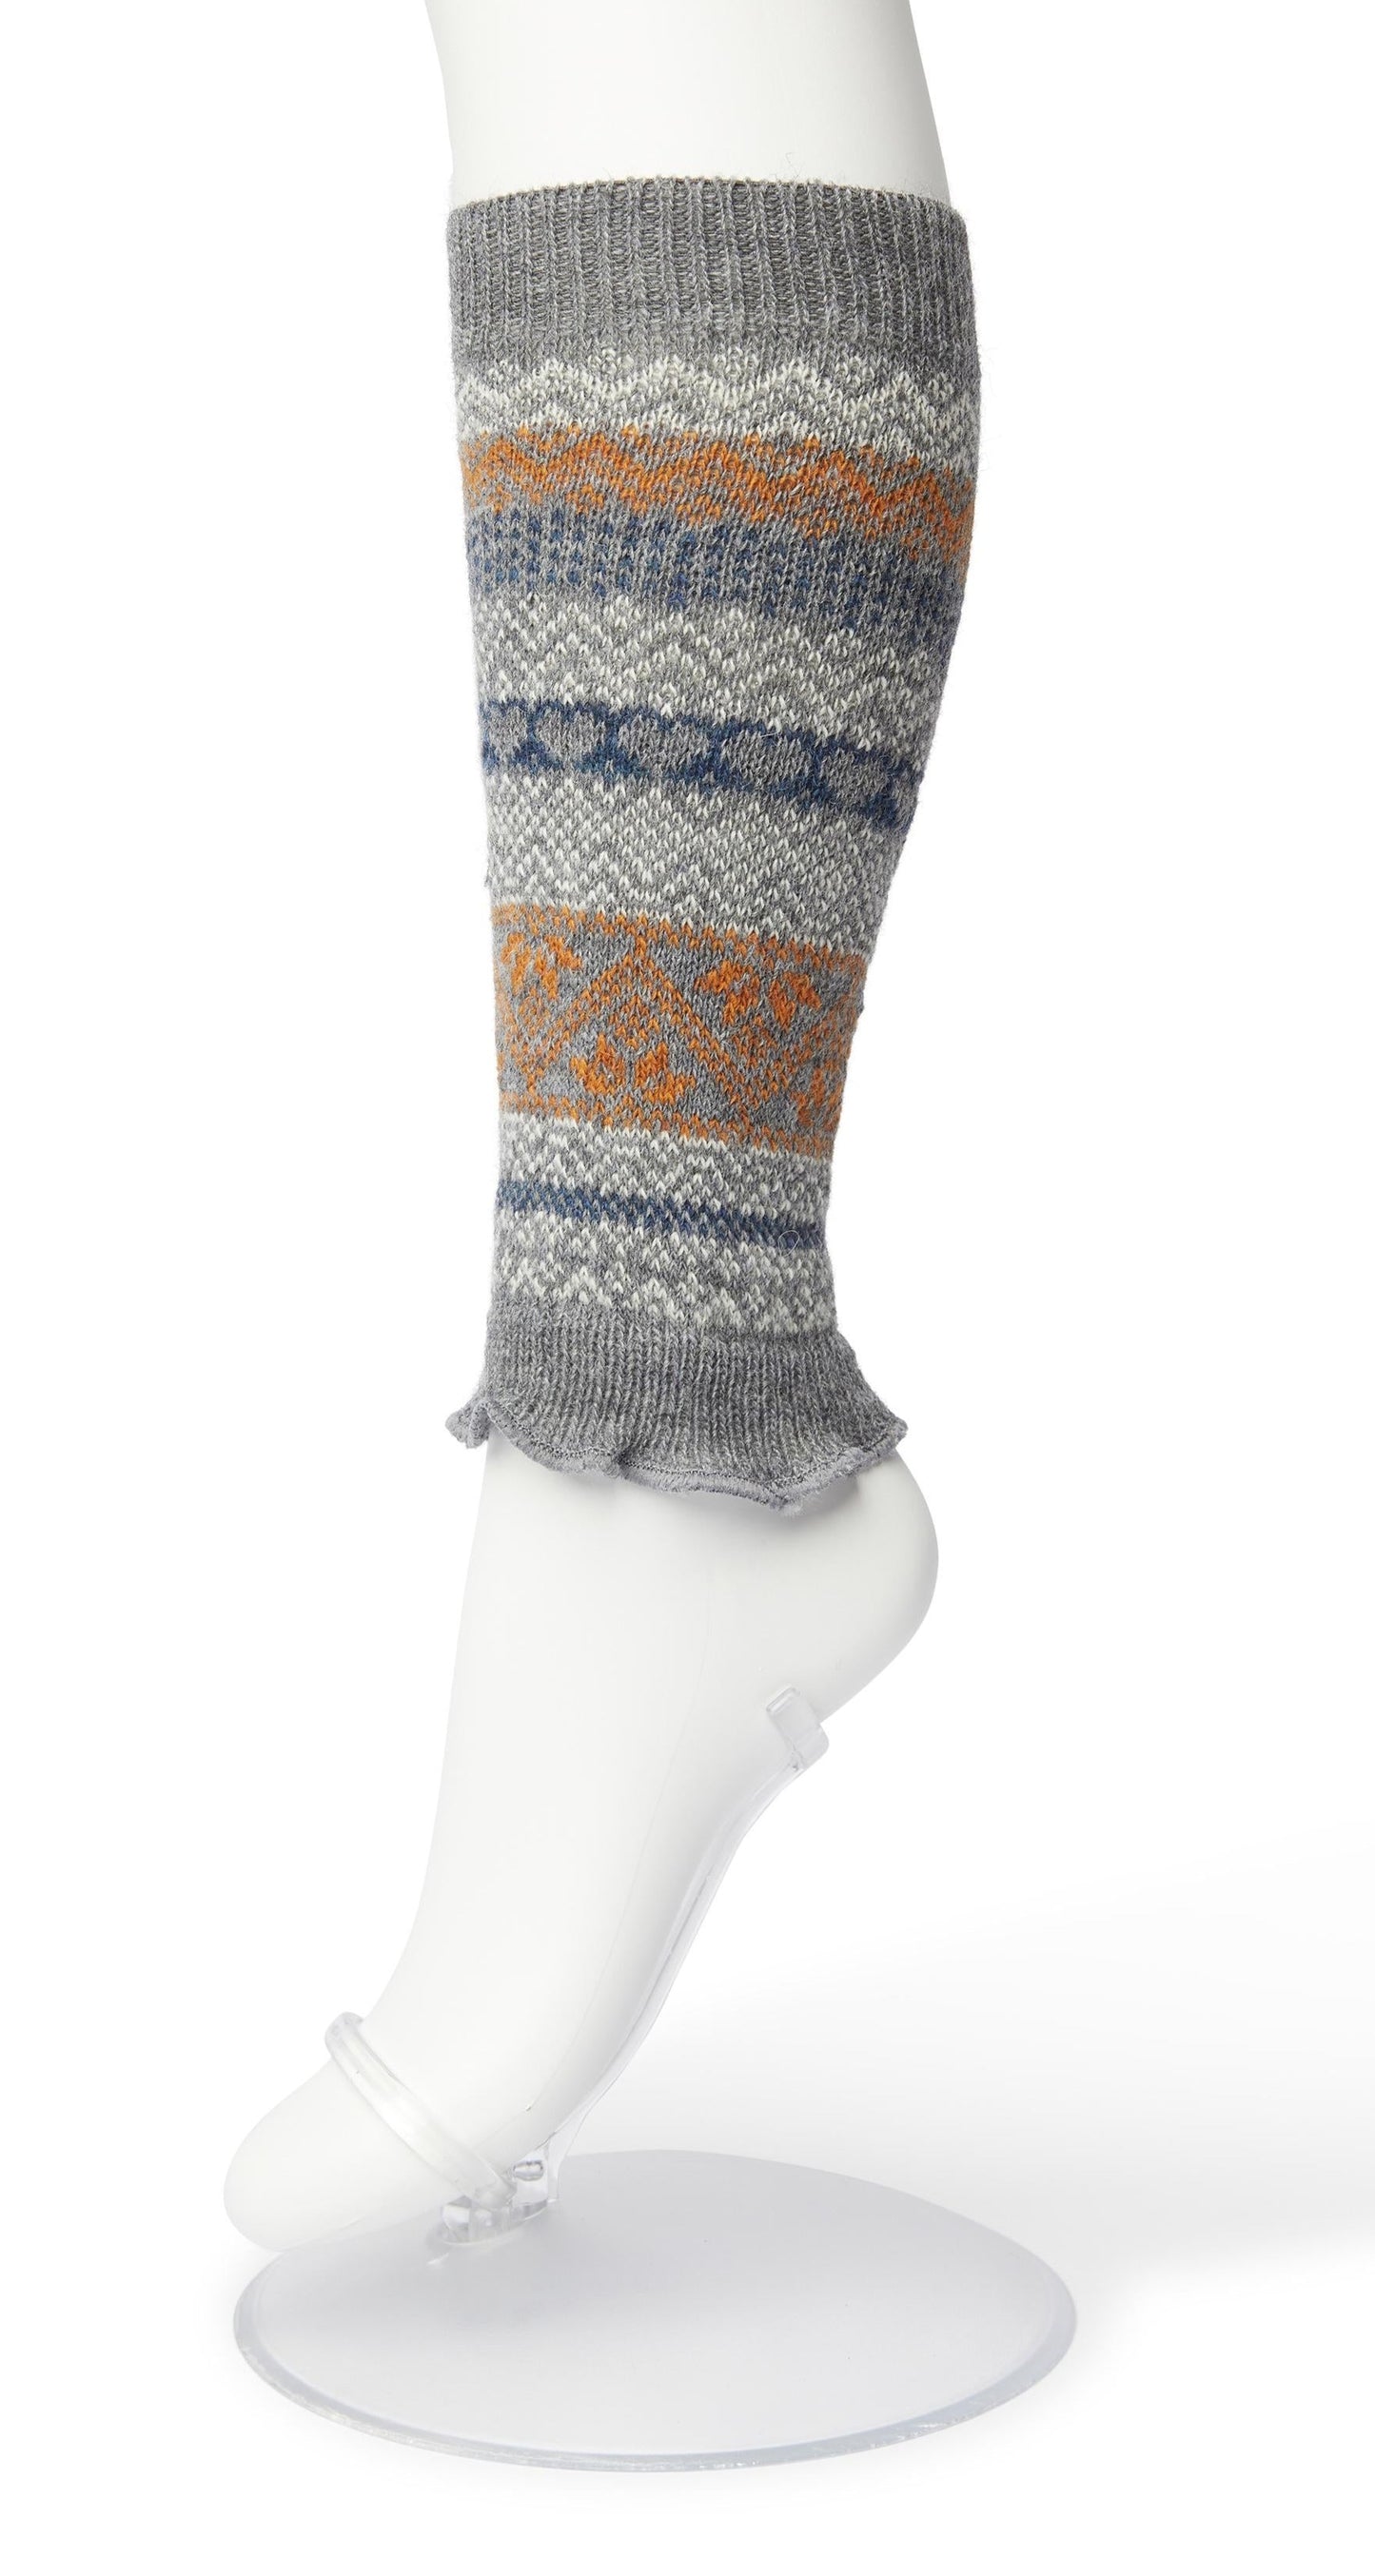 Bonnie Doon BP051729 Folkloric Legwarmers - Grey, orange, navy and white warm and soft knee length knitted leg-warmers with a fairisle style pattern, elasticated cuff and frill edge.